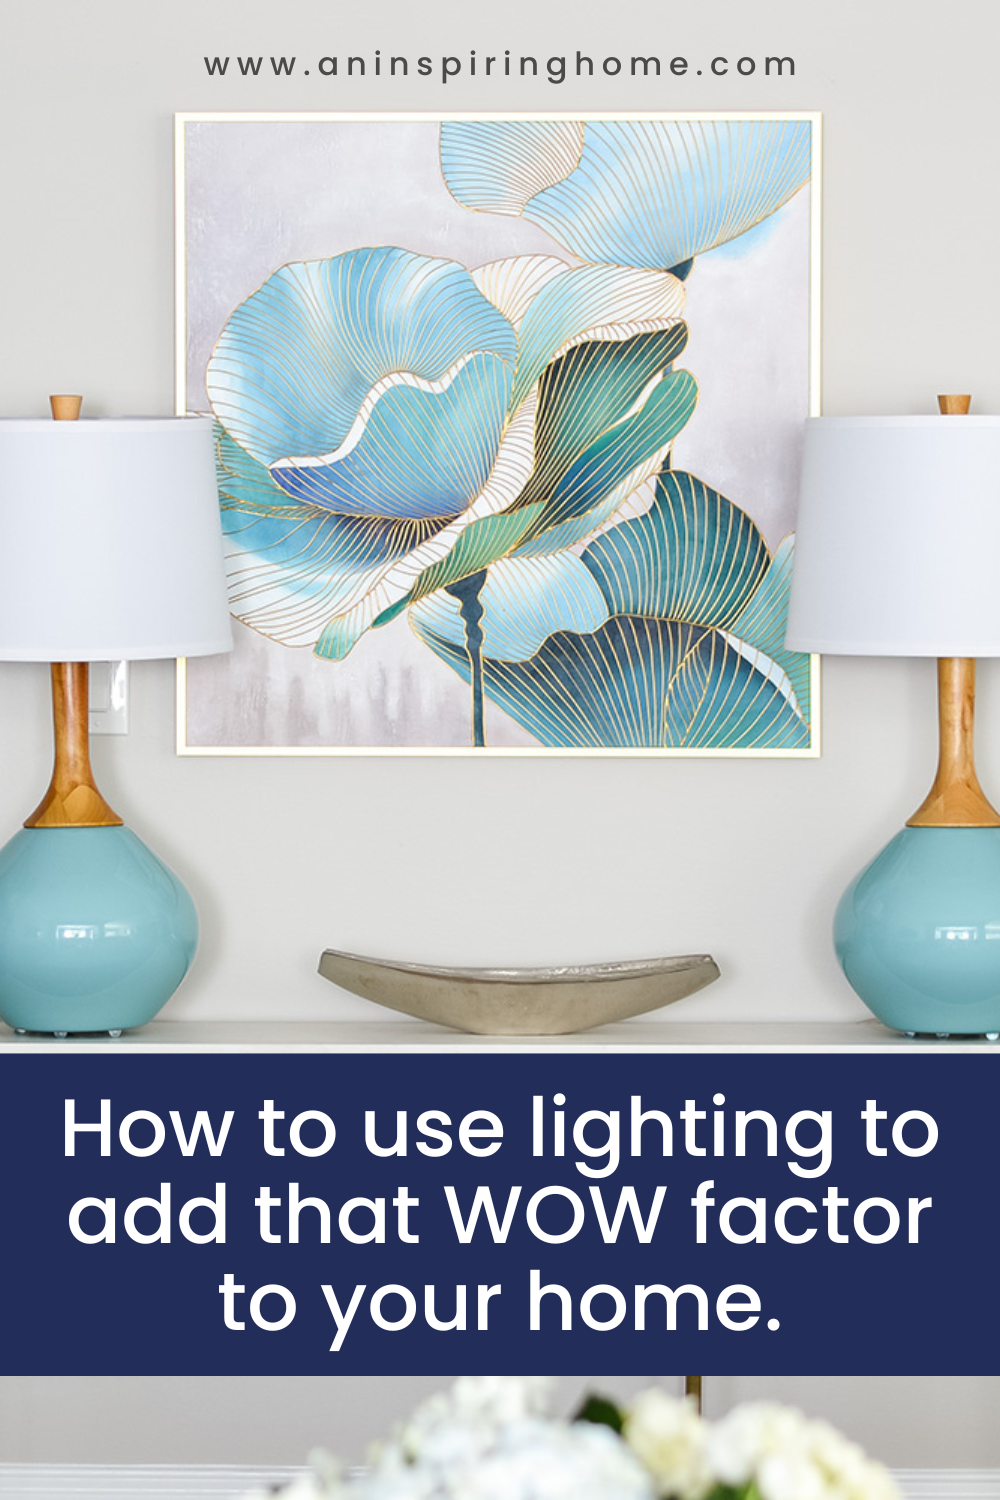 How to use lighting to add that WOW factor to your home.